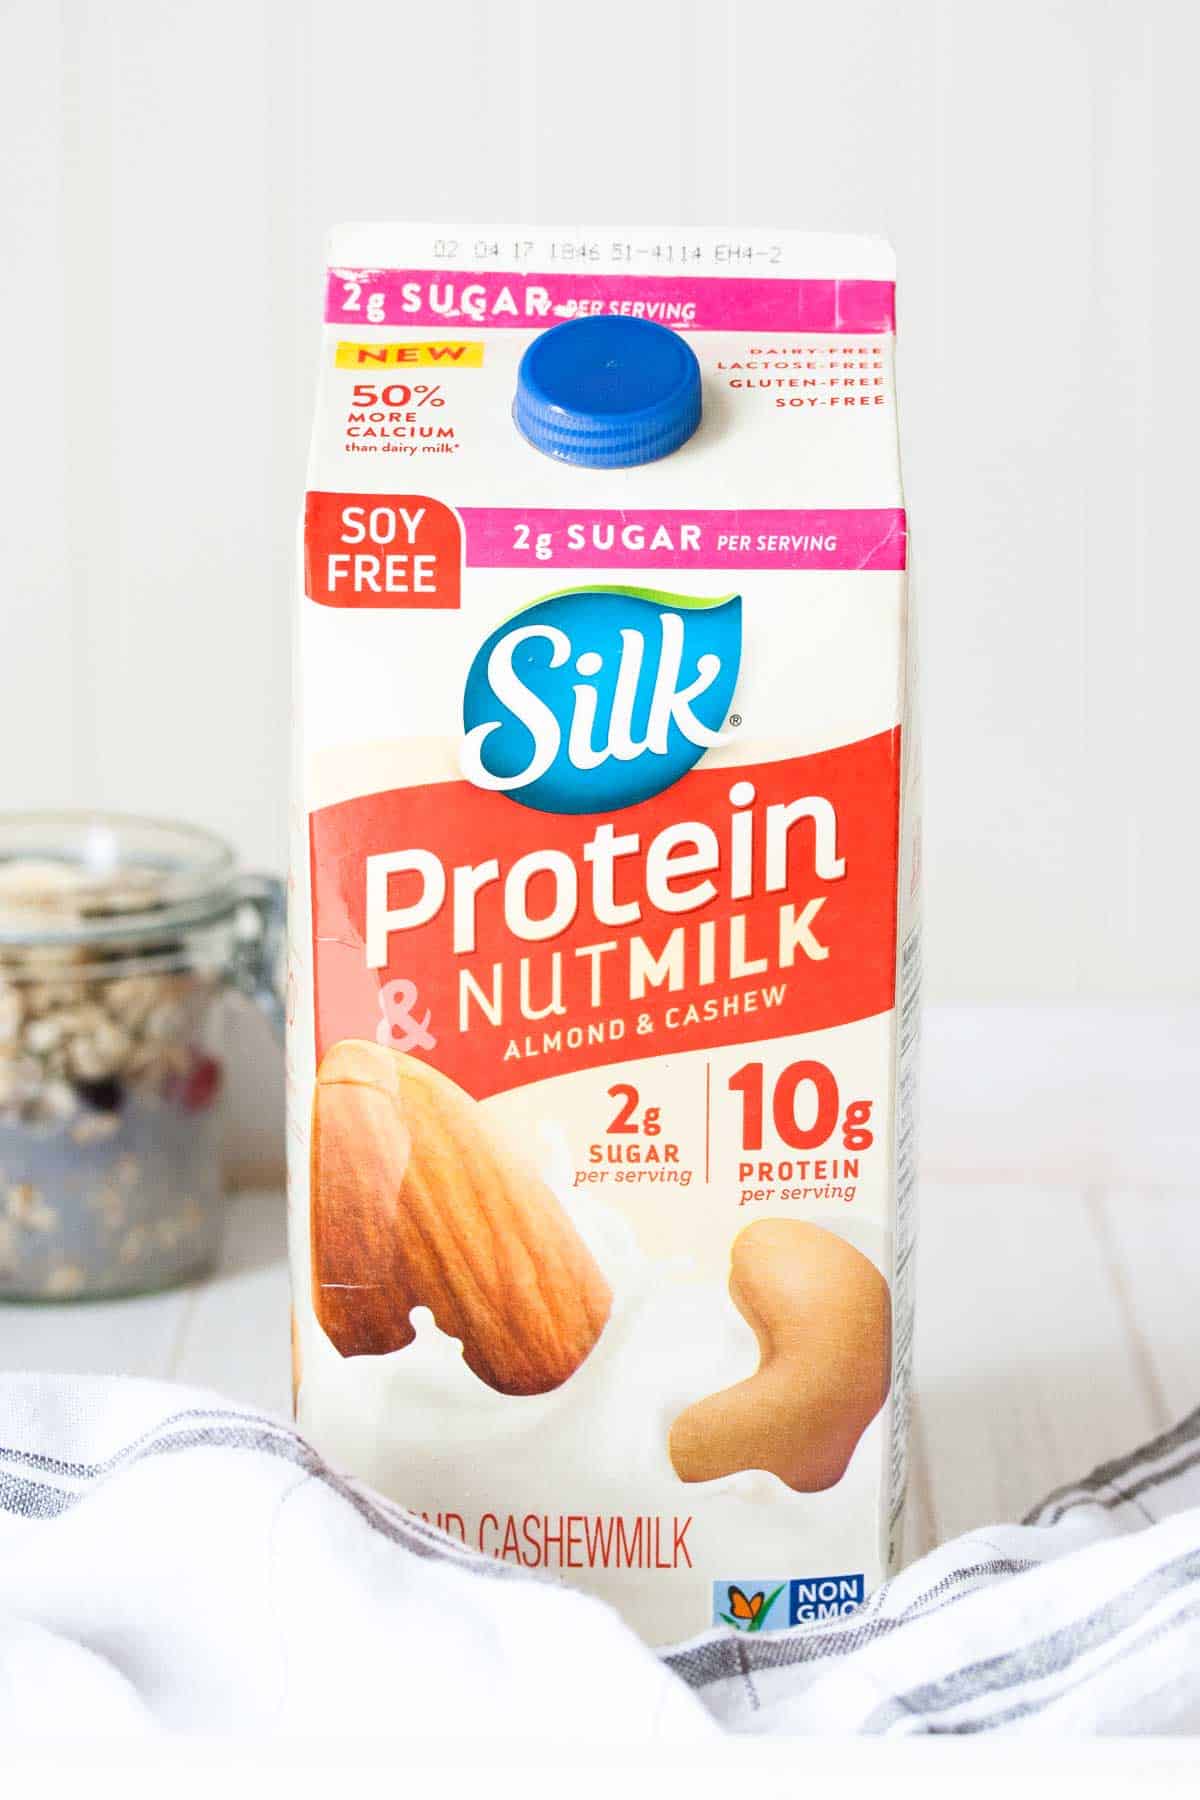 A red and white carton of protein nut milk by Silk on a white surface.